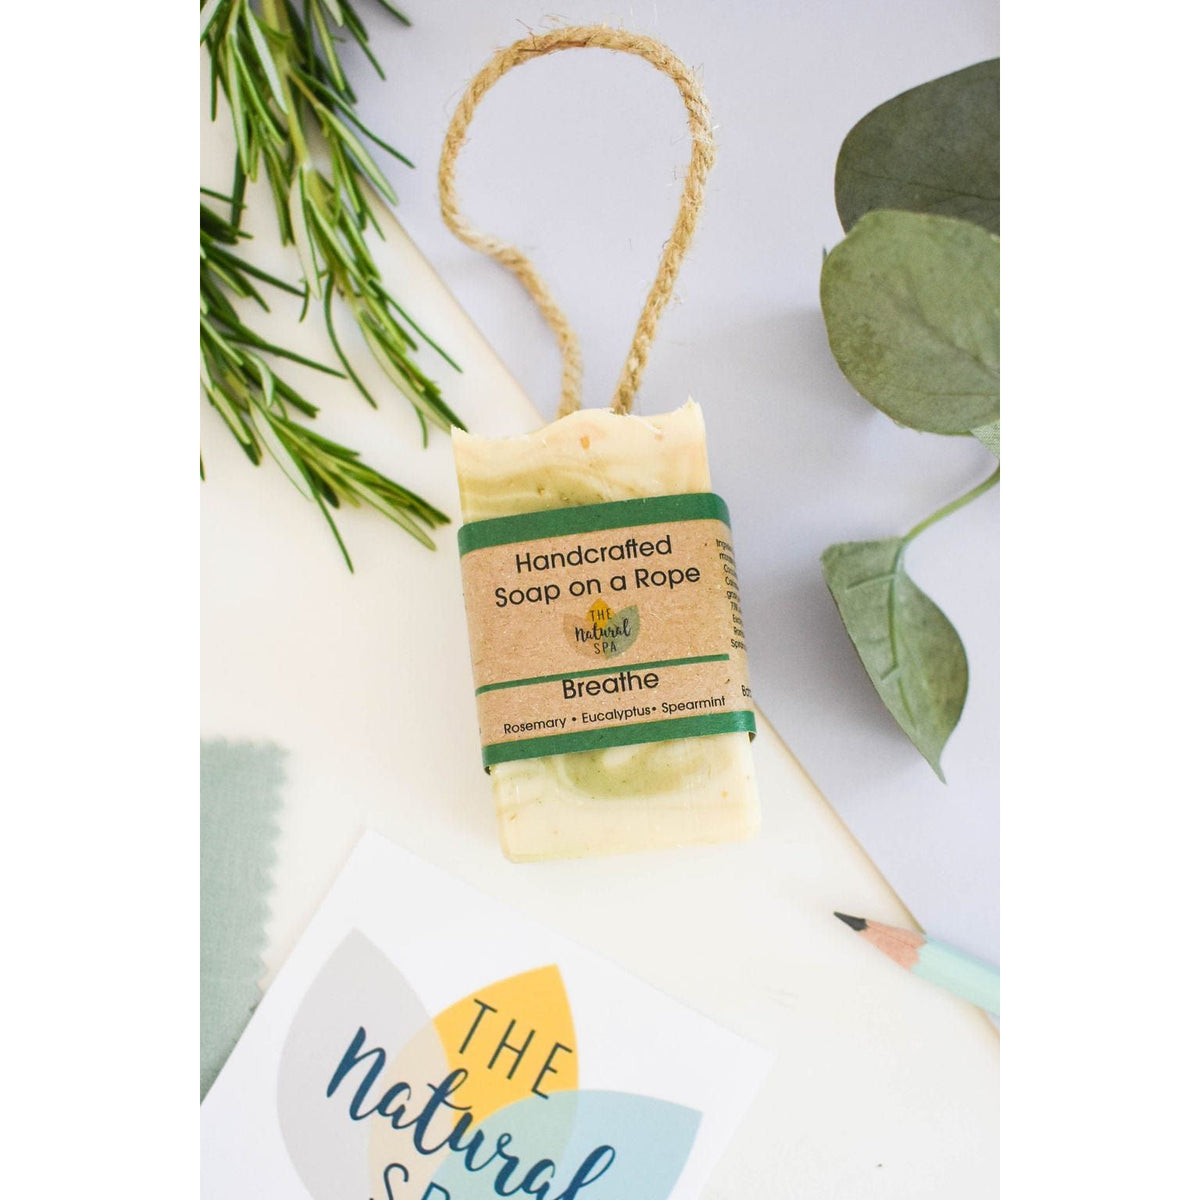 The Natural Spa Breathe Soap on a Rope